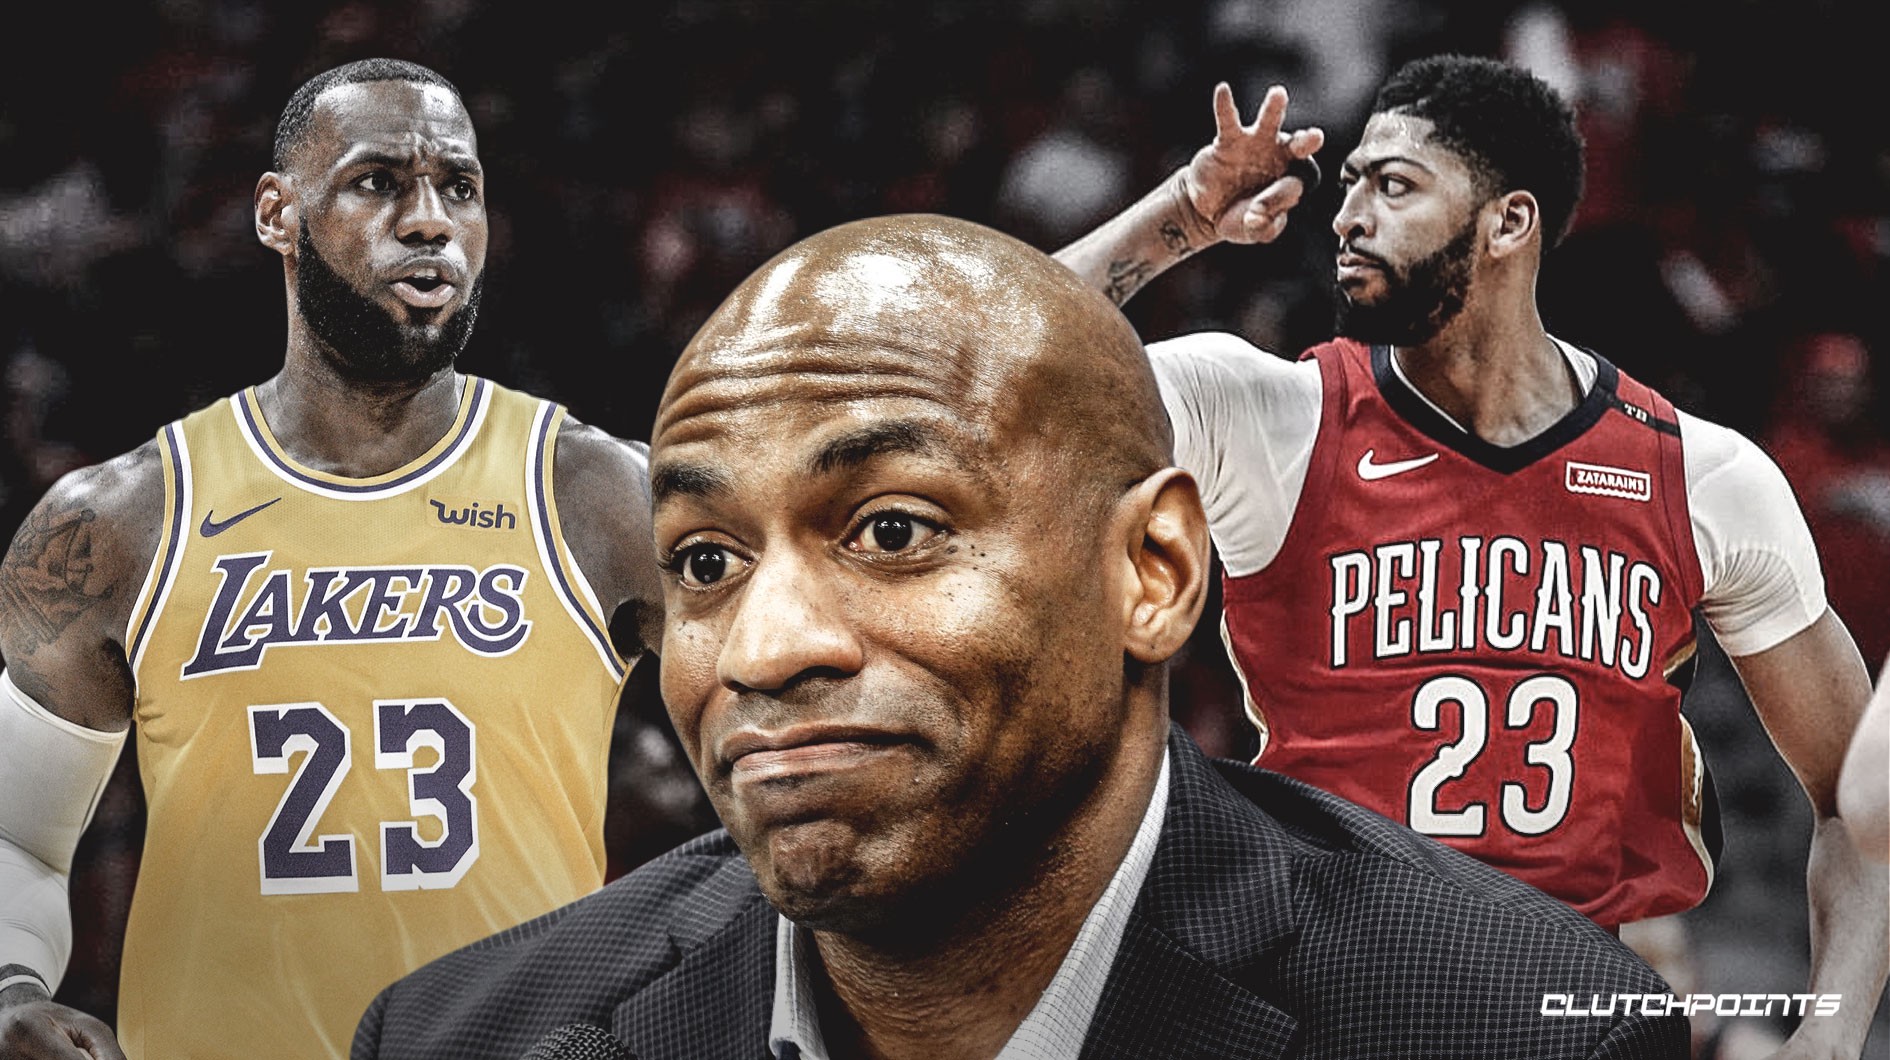 NBA Talk #51: Why did the Pelicans Fired Dell Demps? — dwin0603 on Scorum1890 x 1060